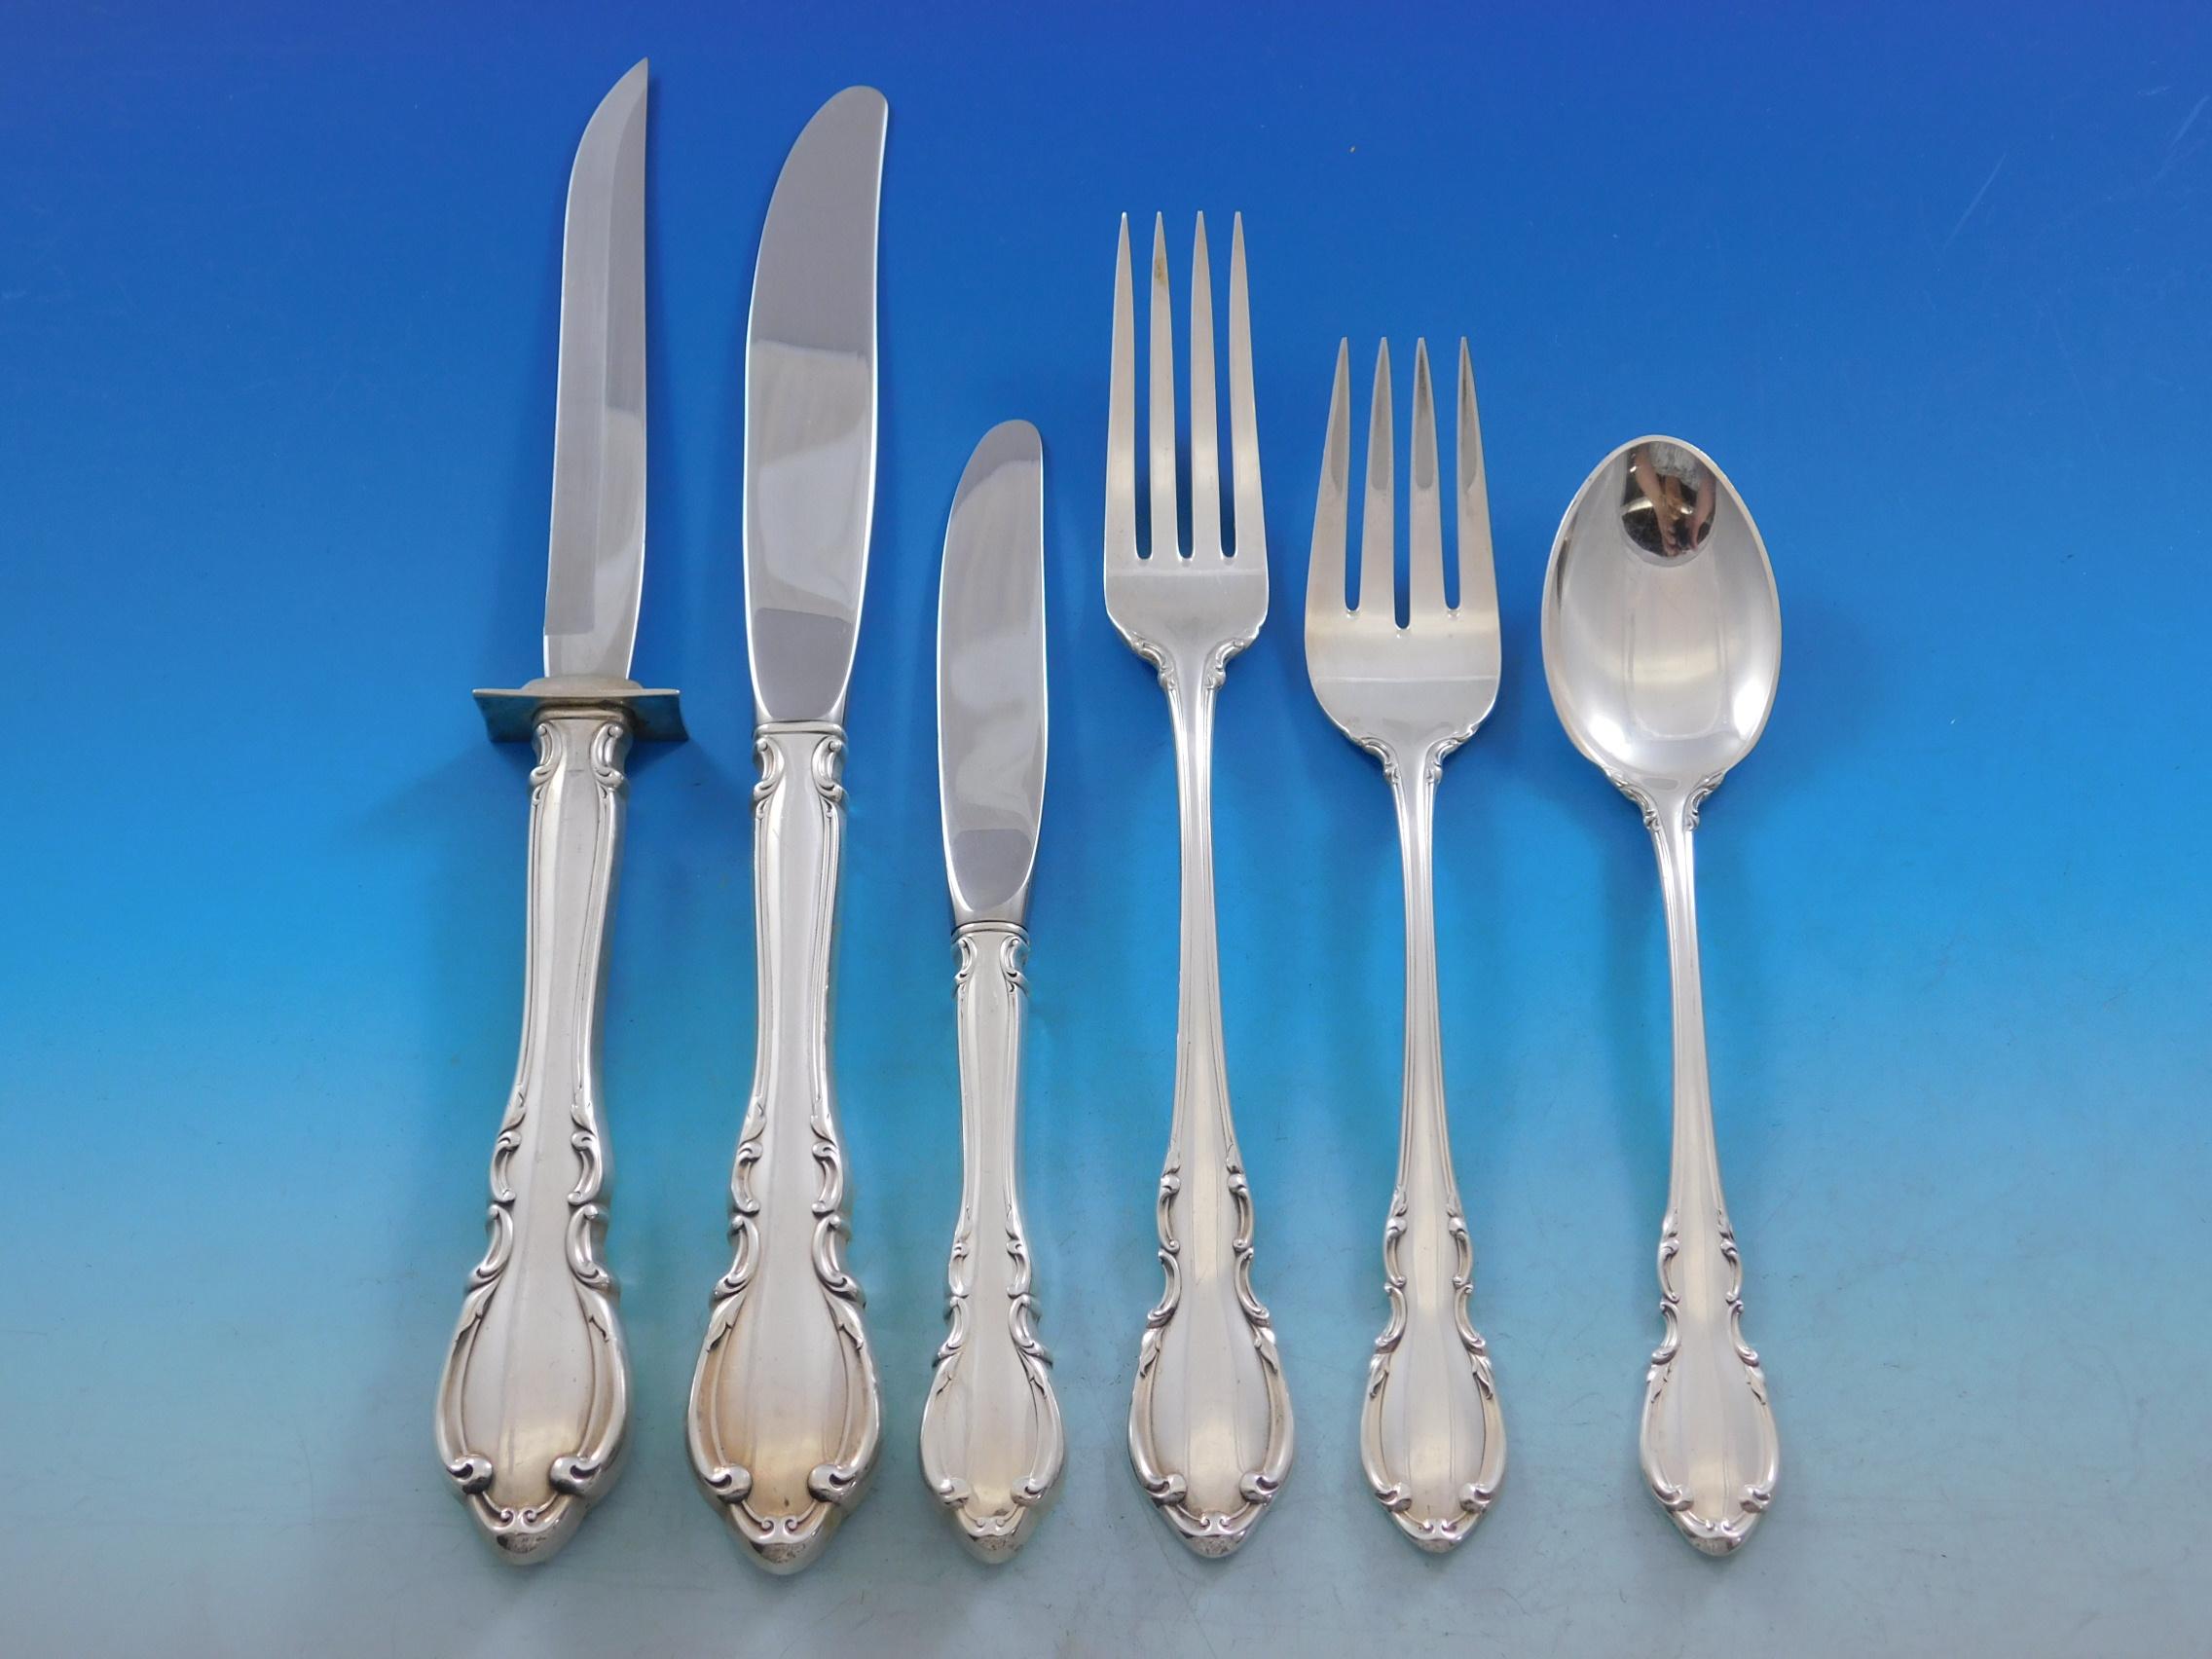 Legato by Towle sterling silver flatware set, 54 pieces. This set includes:

8 knives, modern, 9